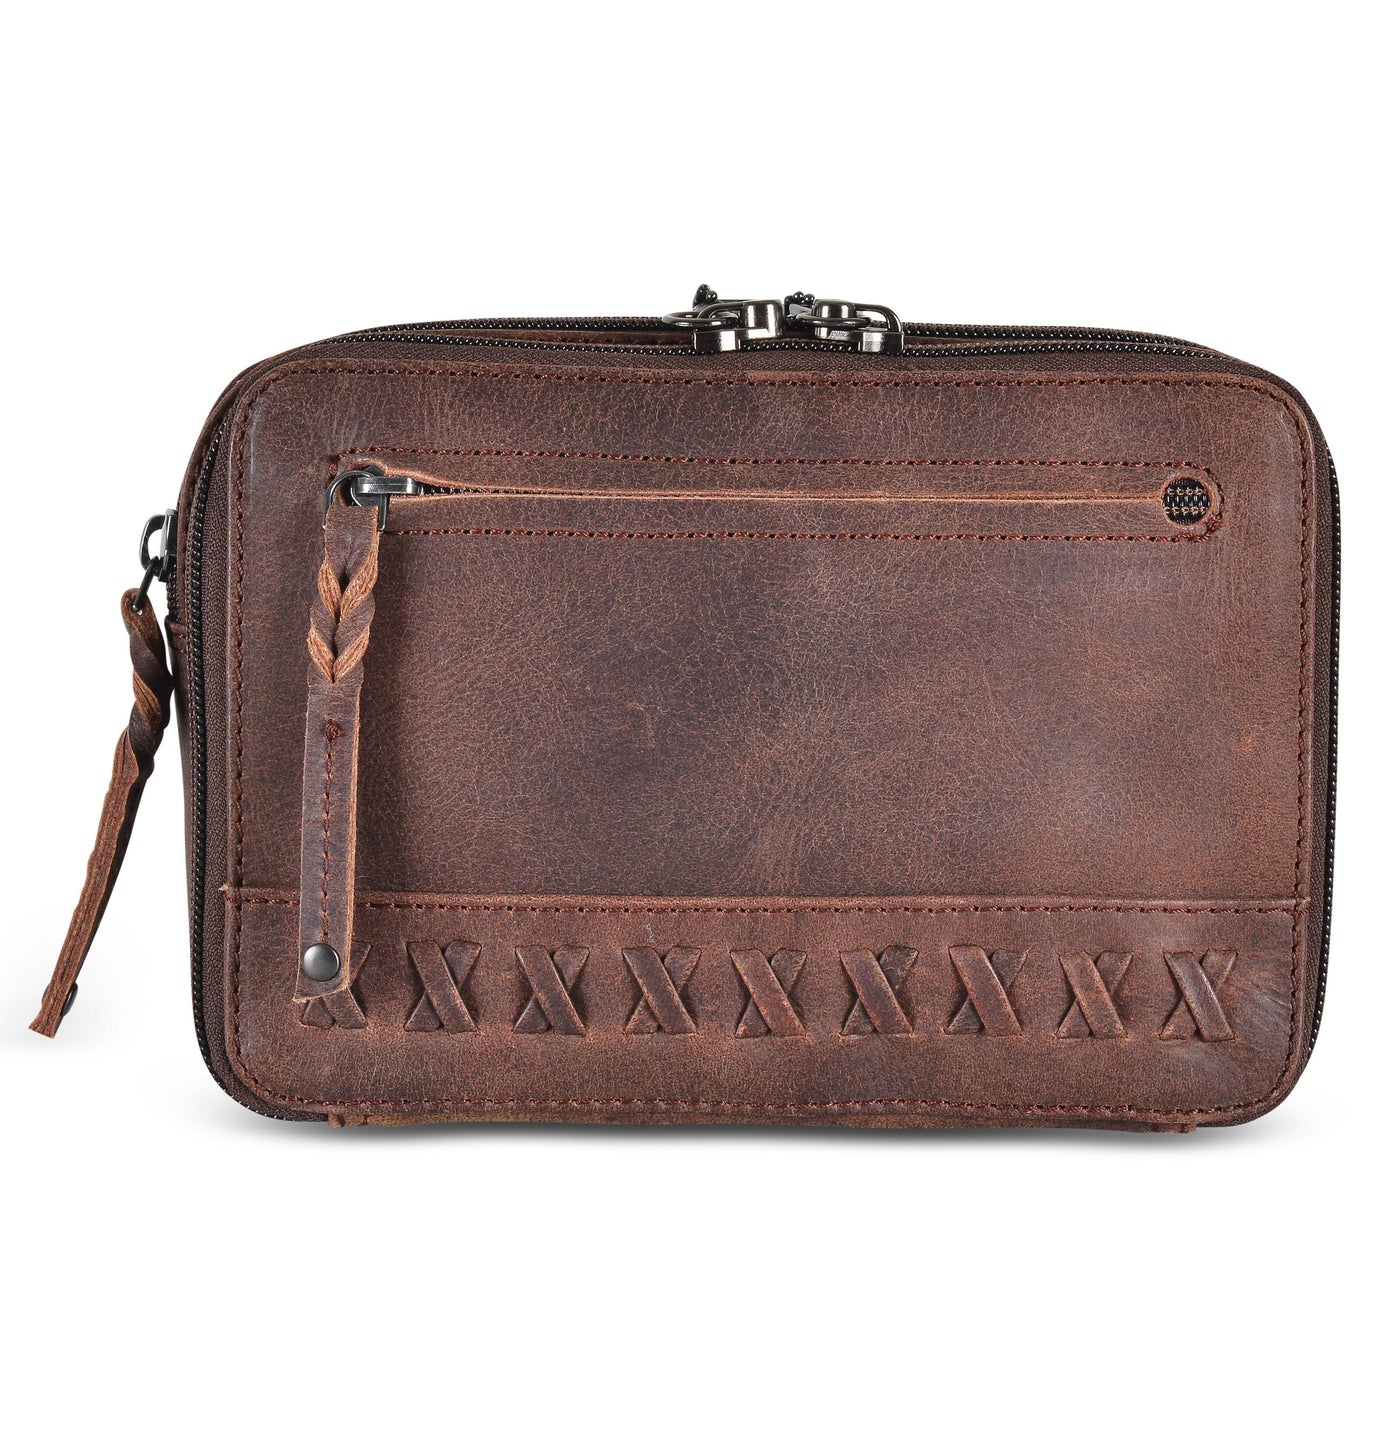 Fanny Pack Leather Bag Distressed Leather Bag Dark Brown 